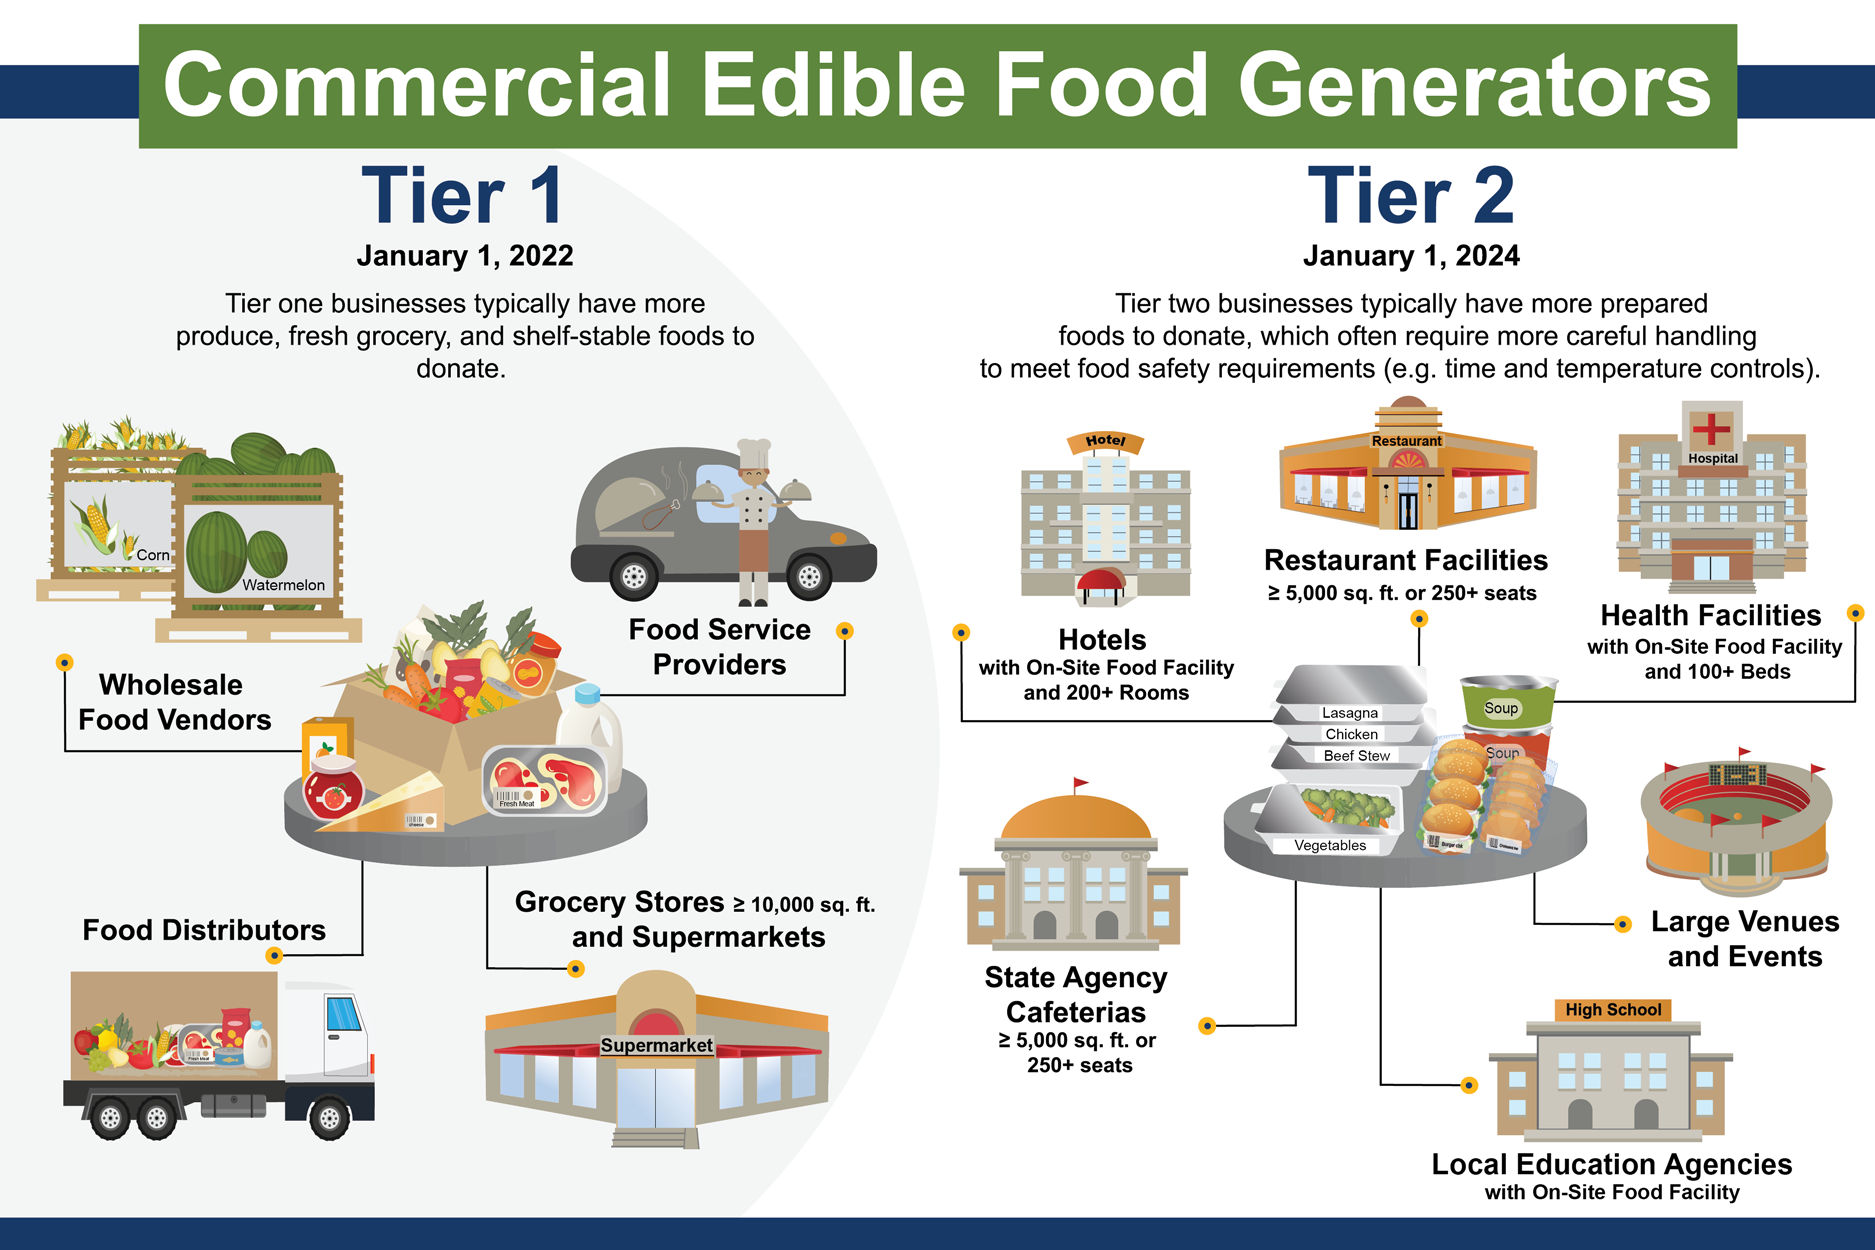 CalRecycle explanation of commercial food generator tiers for compliance with California Senate Bill 1383.